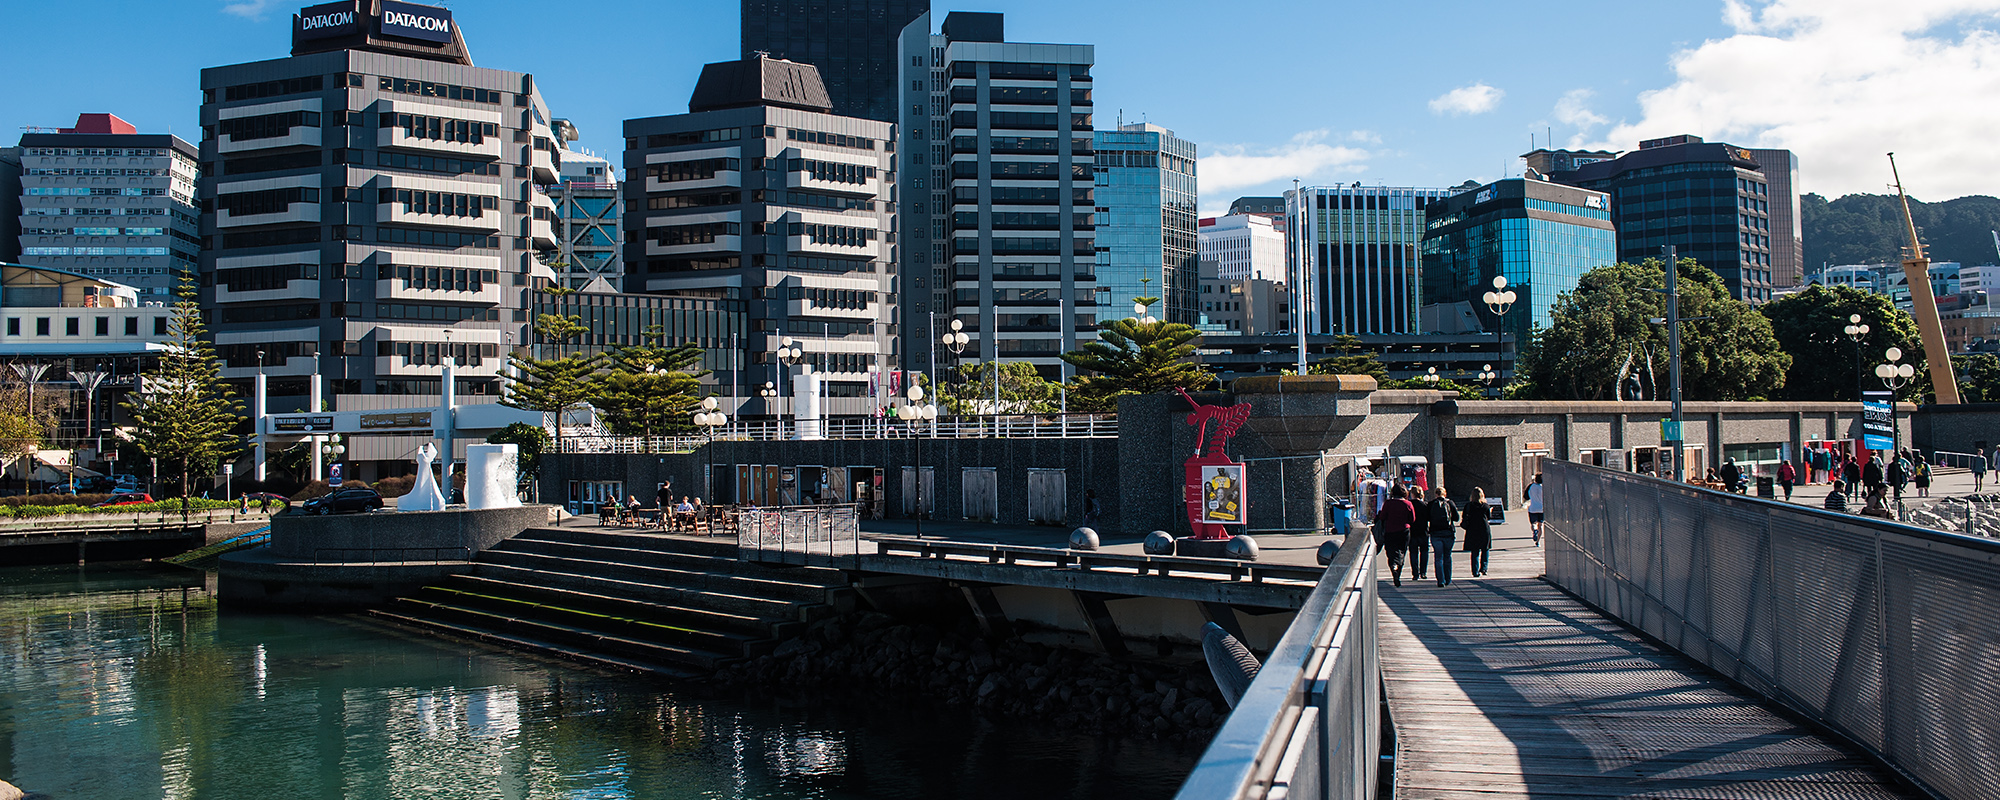 Looking at the central CBE from the Wellington waterfront.